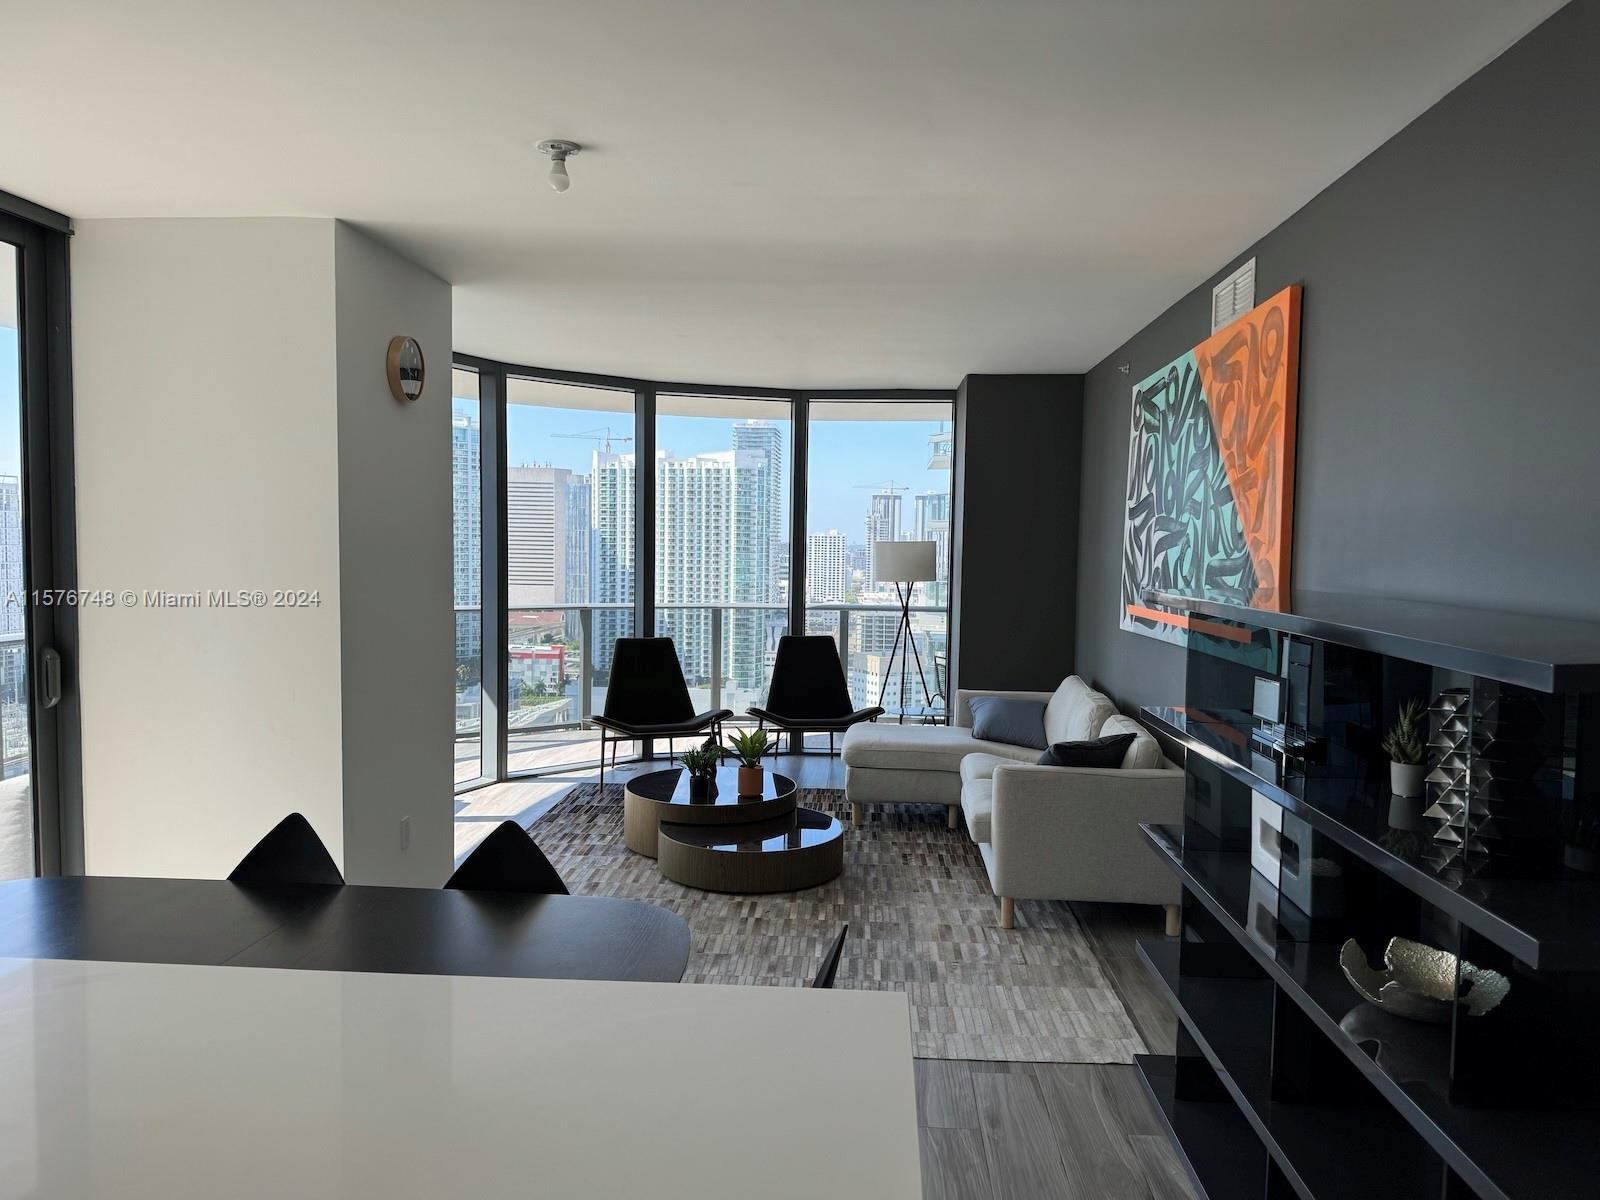 Experience Panoramic Views at SLS LUX Brickell.

Move in today and enjoy an apartment with stunnin